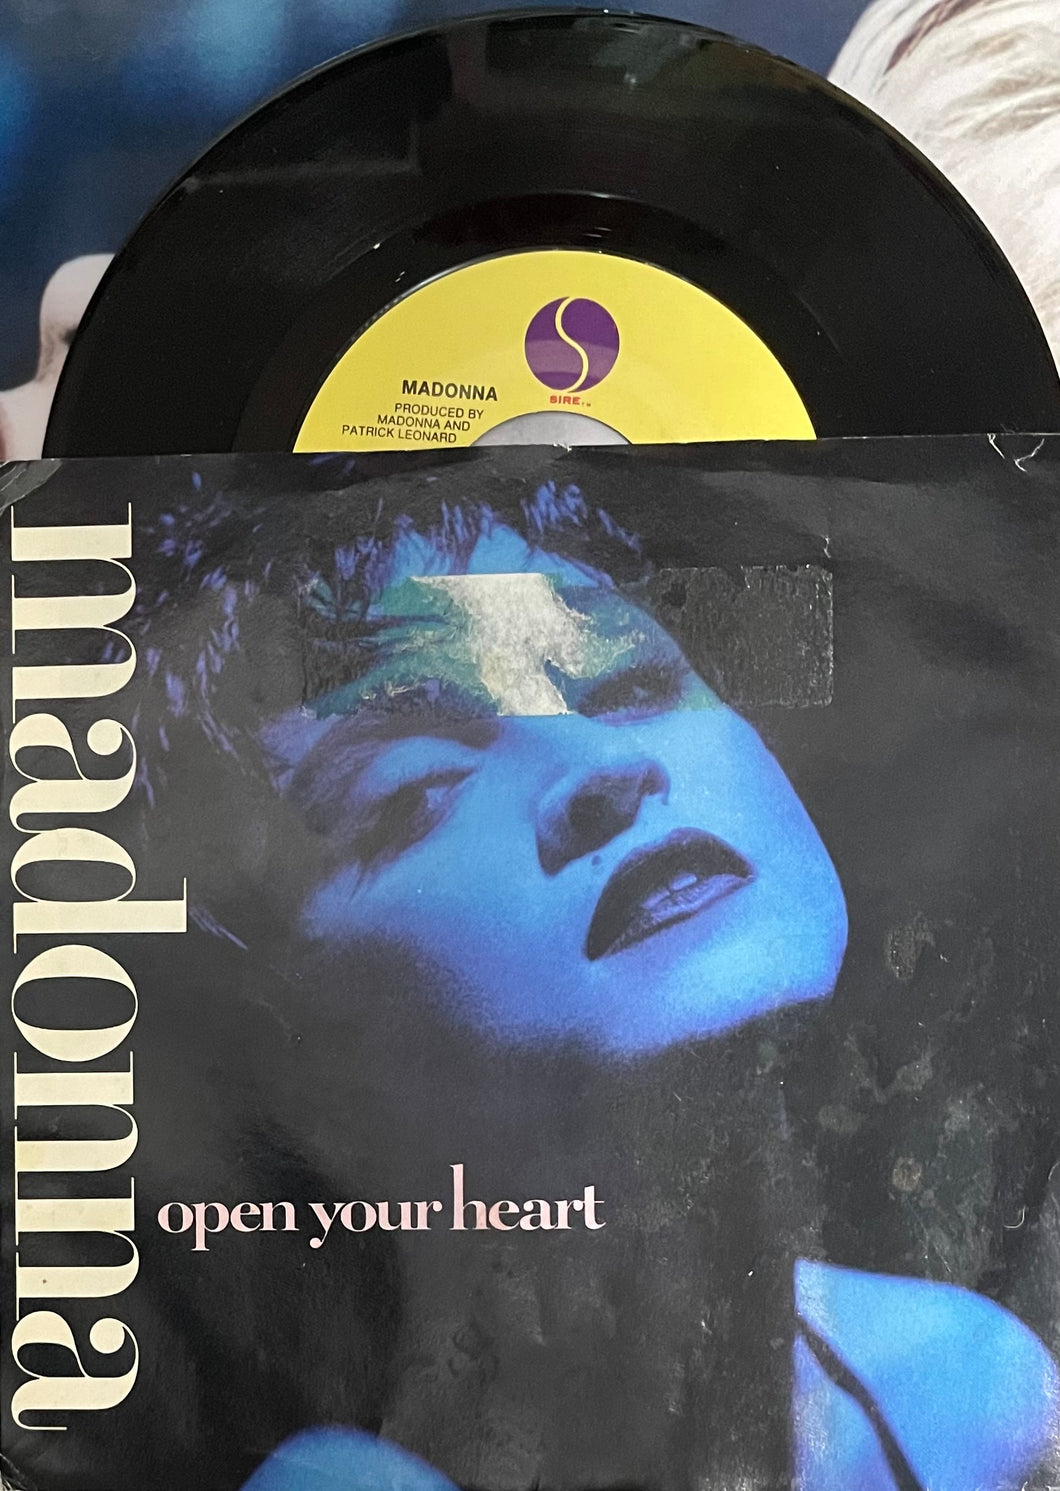 Madonna - Open Your Heart (7” Single)